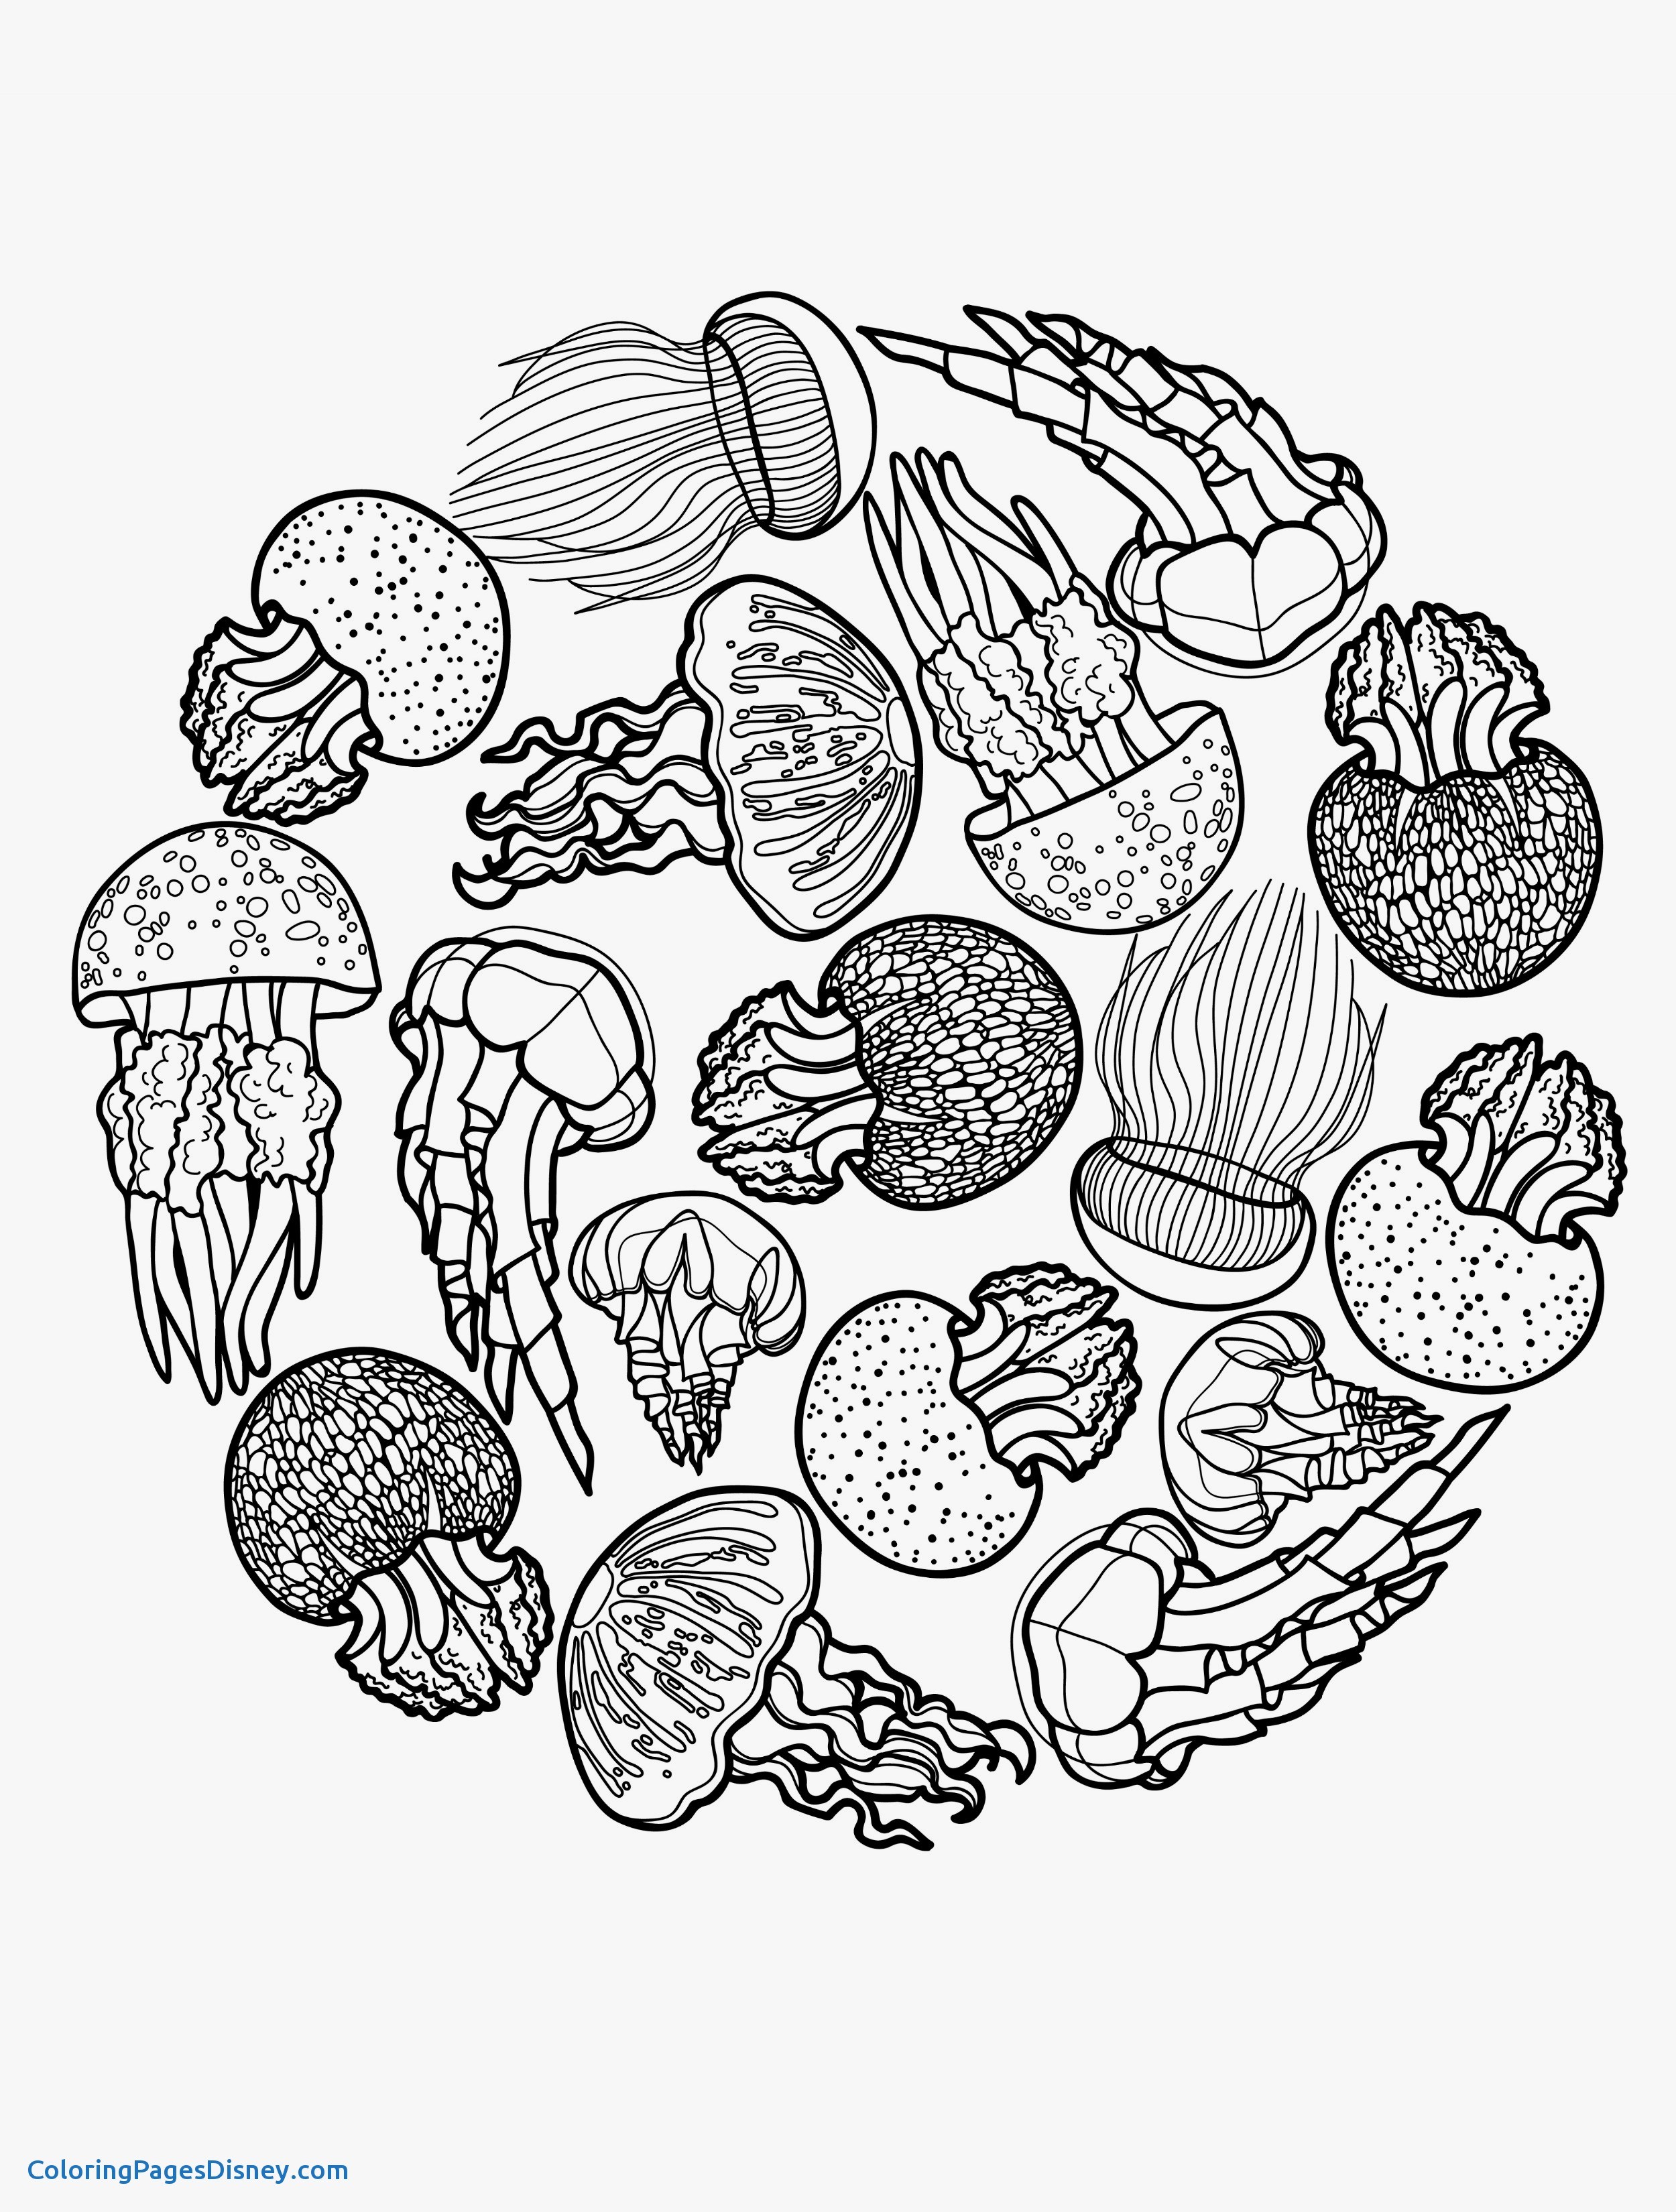 195 Jellyfish Coloring Page Designs: Underwater Beauty in Color 193